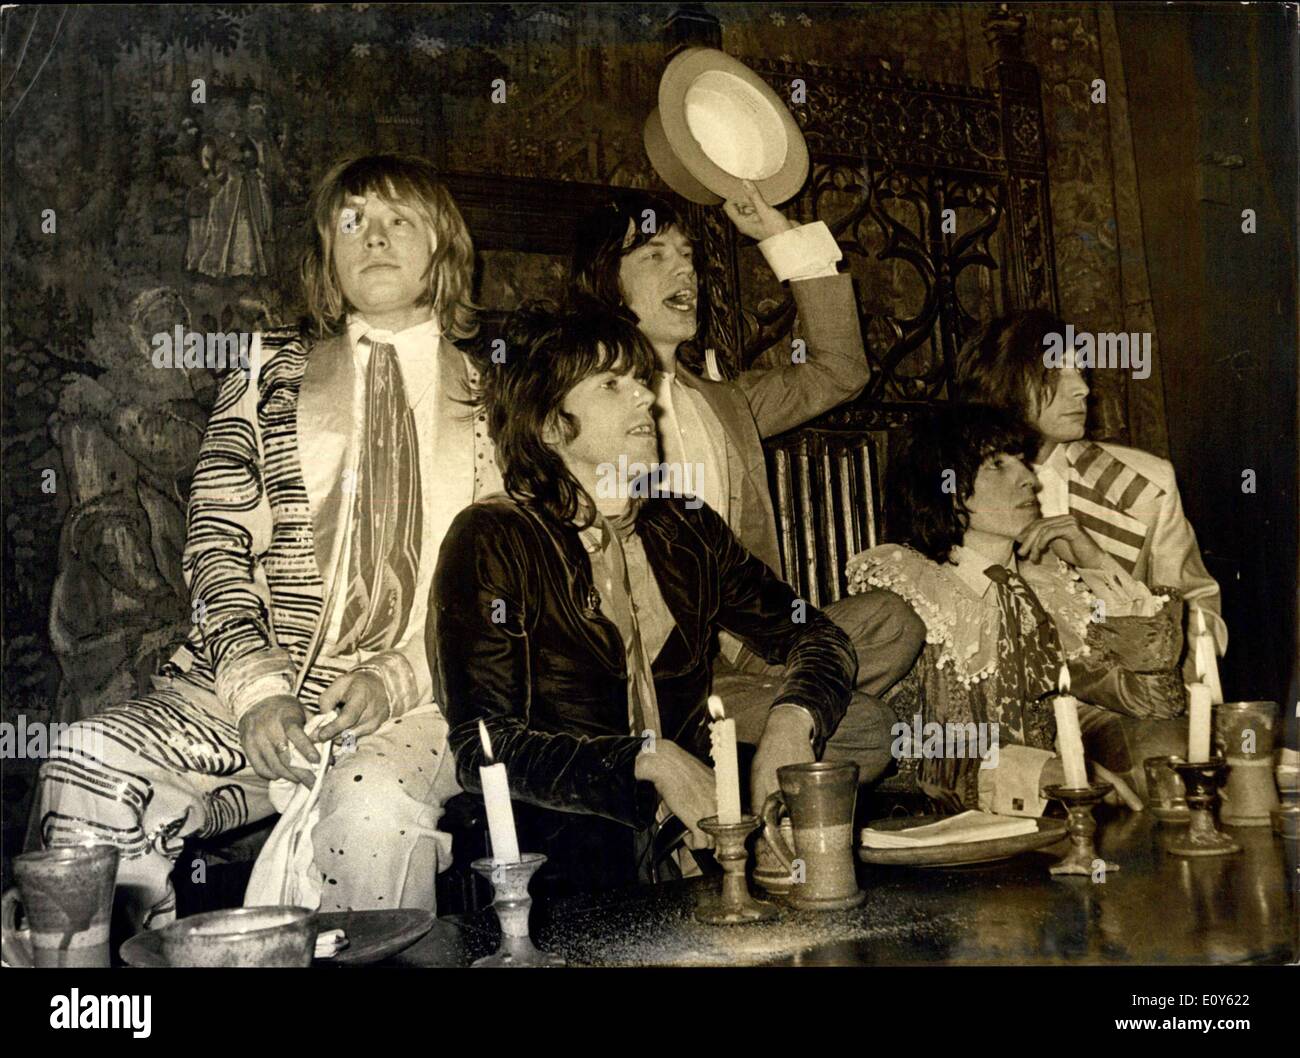 Dec. 05, 1968 - Custard Pie Throwing at Beggars Banquet given by rolling Stones: The Rolling stones today held a Beggars Banquet, with serving wenches, etc, to which a number of journalist friends, television folk El Al, were invited, in the Elizabethan Room, Gore Hotel, Queensgate. The Banquet was rounded up with a custrad pie battle.Picture Shows: The Rolling Stones, Suitably garbed for the banquet-. They are (L to R): Brian Jones; Keith Richard: MIck Jagger; Bill Wyman, and Charlie Watss. Stock Photo